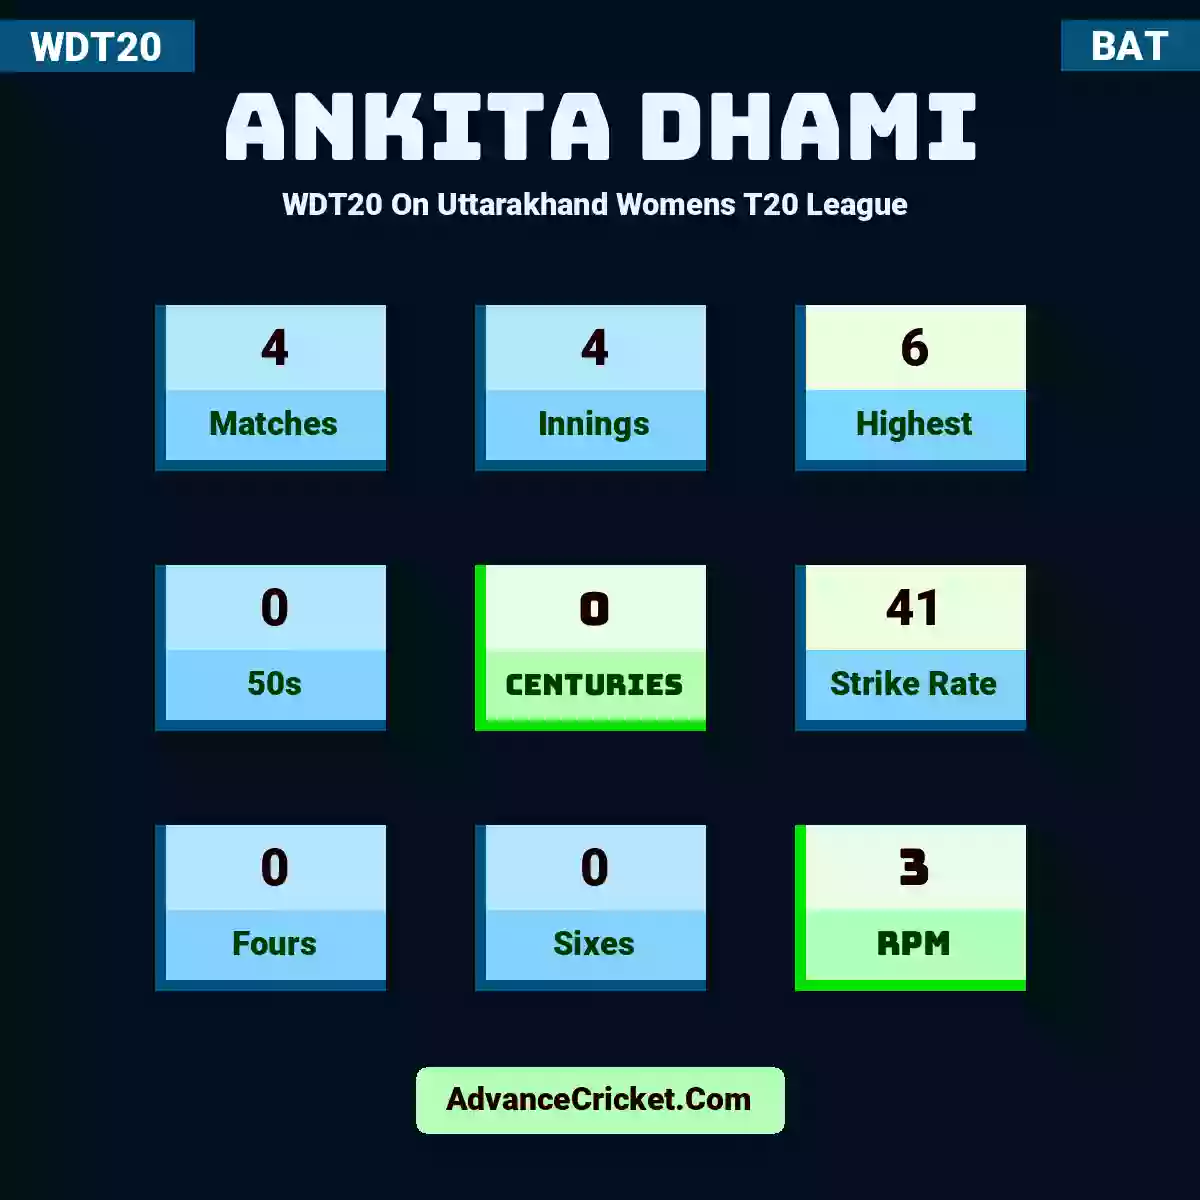 Ankita Dhami WDT20  On Uttarakhand Womens T20 League , Ankita Dhami played 4 matches, scored 6 runs as highest, 0 half-centuries, and 0 centuries, with a strike rate of 41. A.Dhami hit 0 fours and 0 sixes, with an RPM of 3.